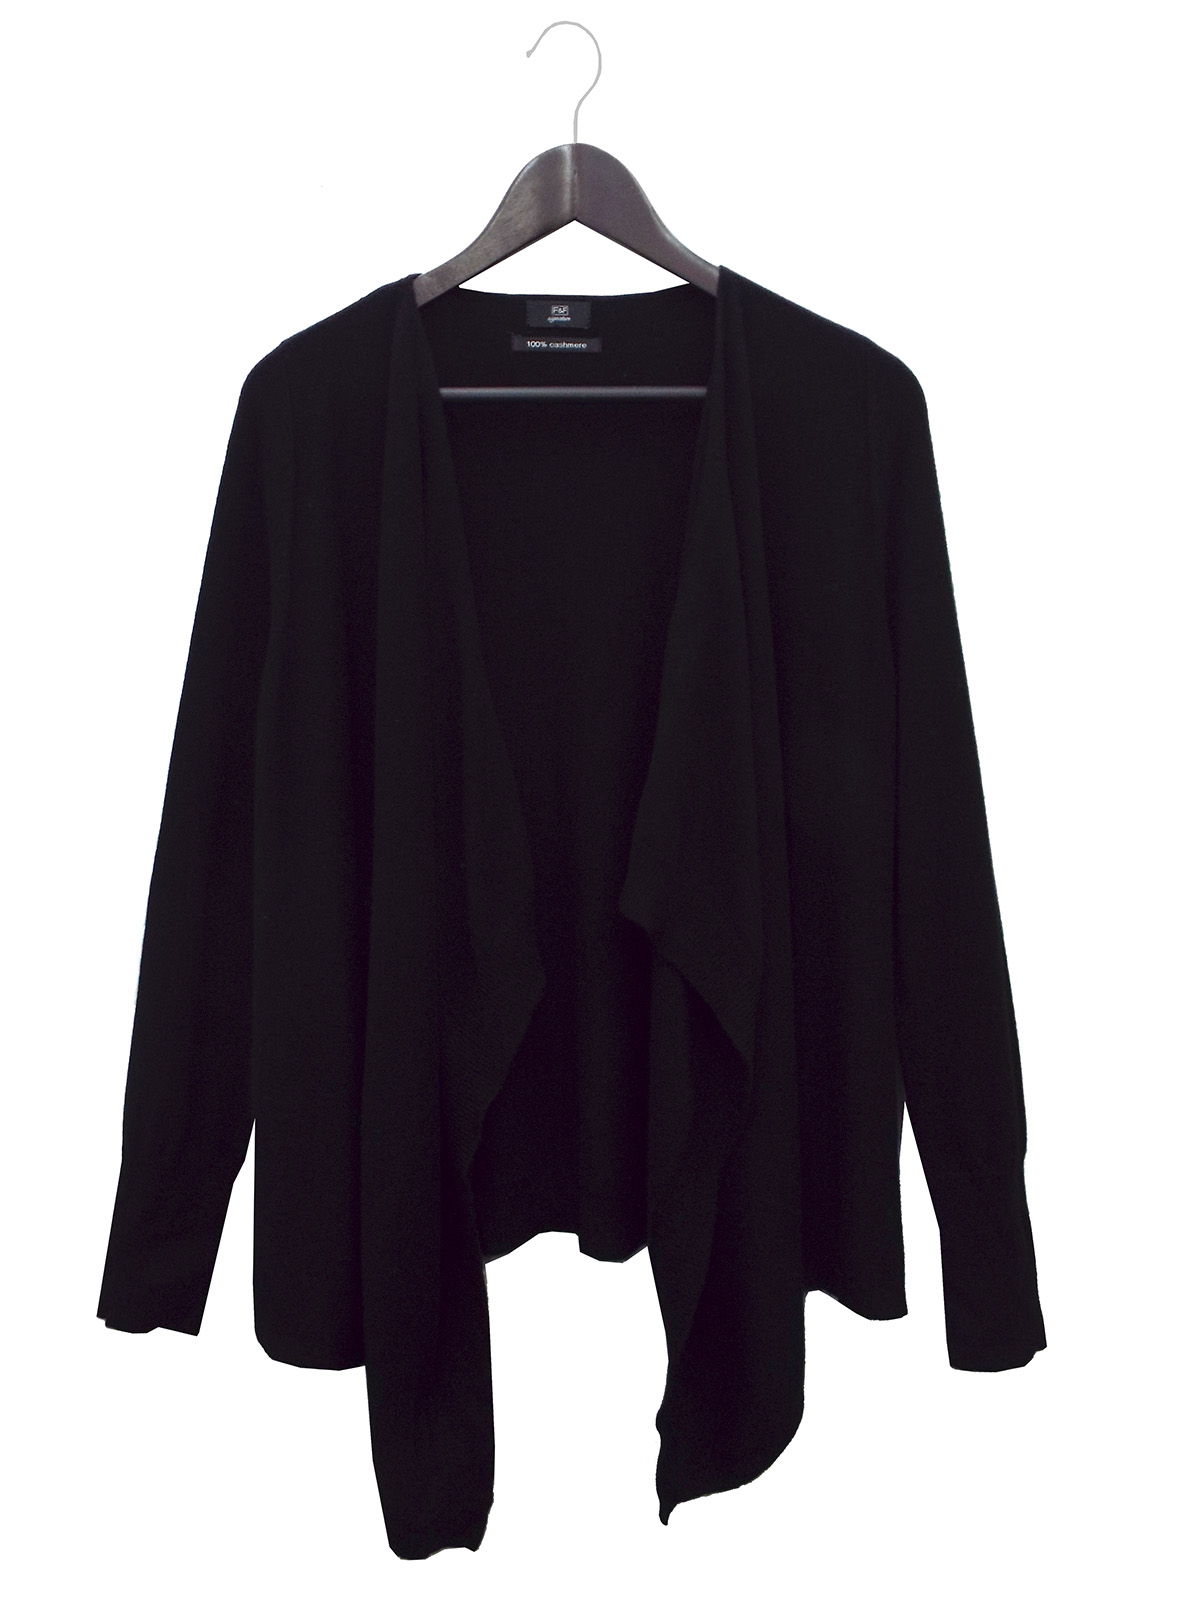 F&F - - F&F BLACK Pure Cashmere Open Front Waterfall Cardigan - Size 8 ...